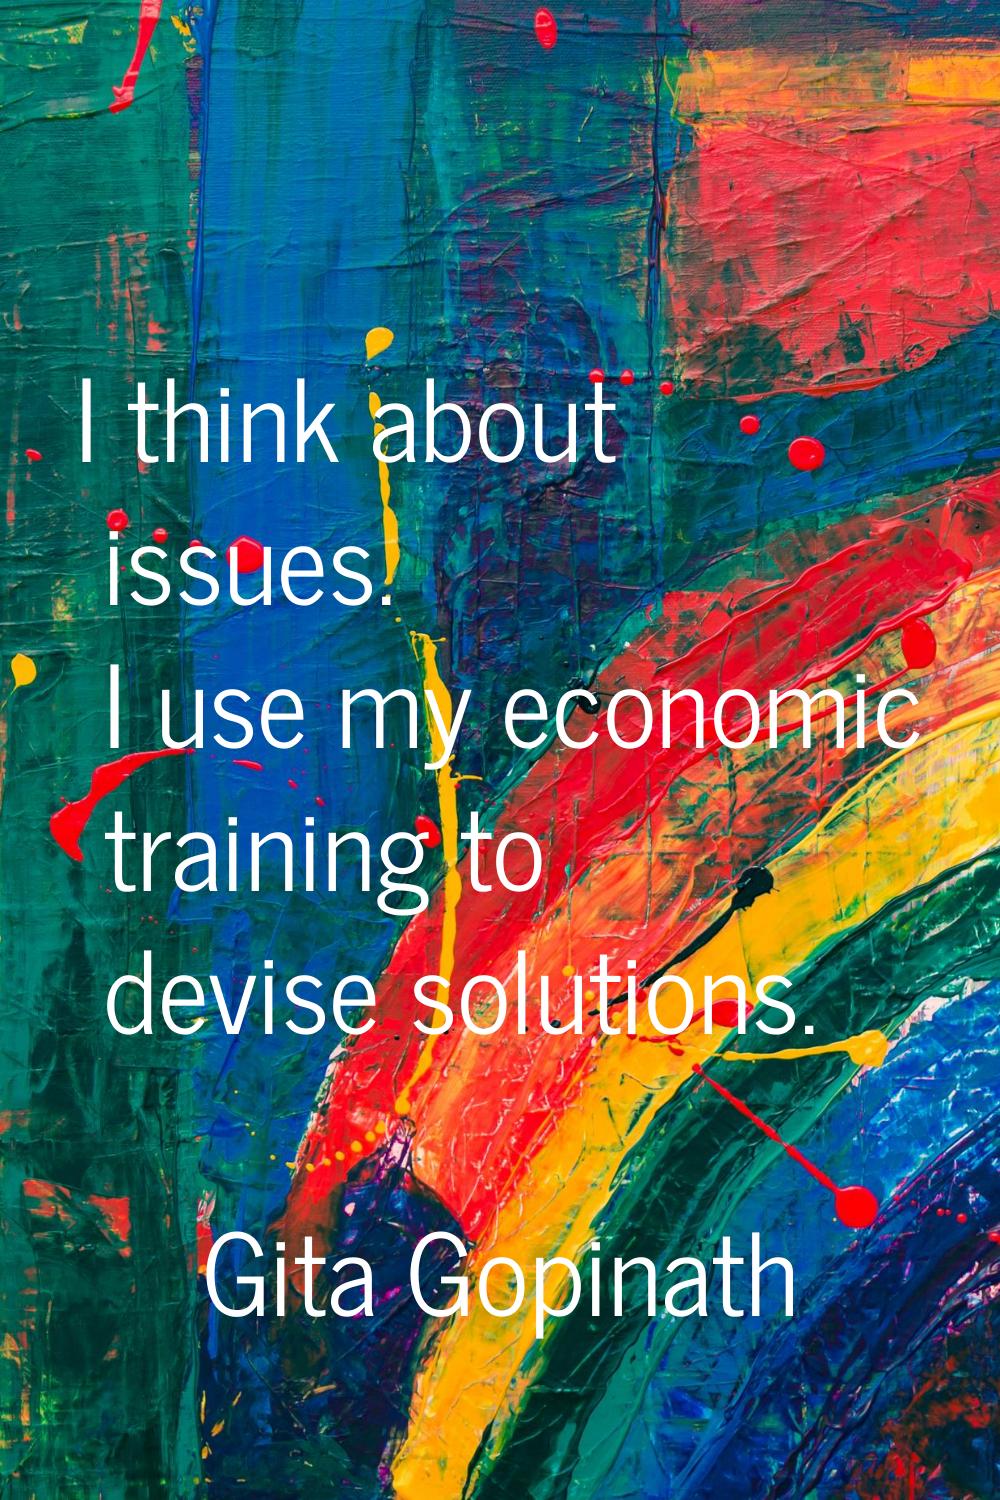 I think about issues. I use my economic training to devise solutions.